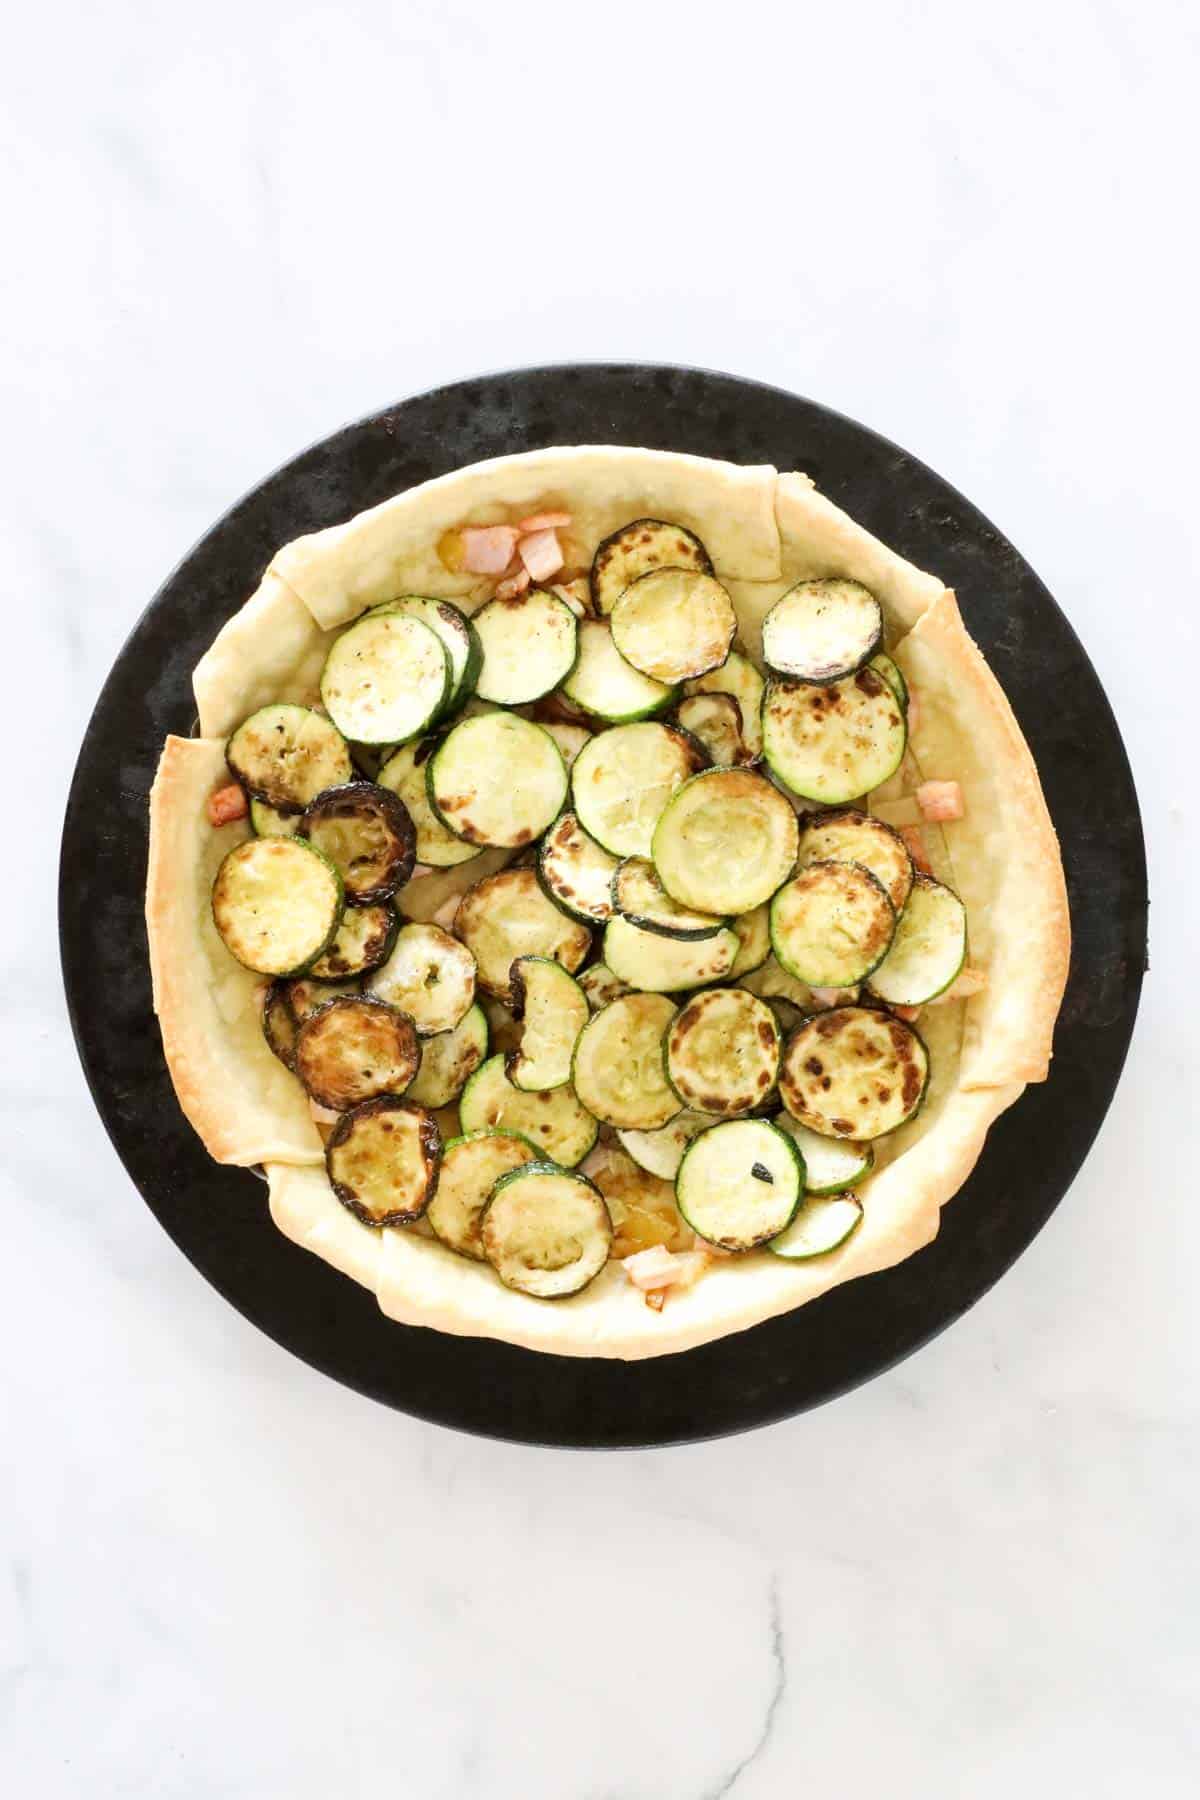 Cooked zucchini slices added to pie crust.